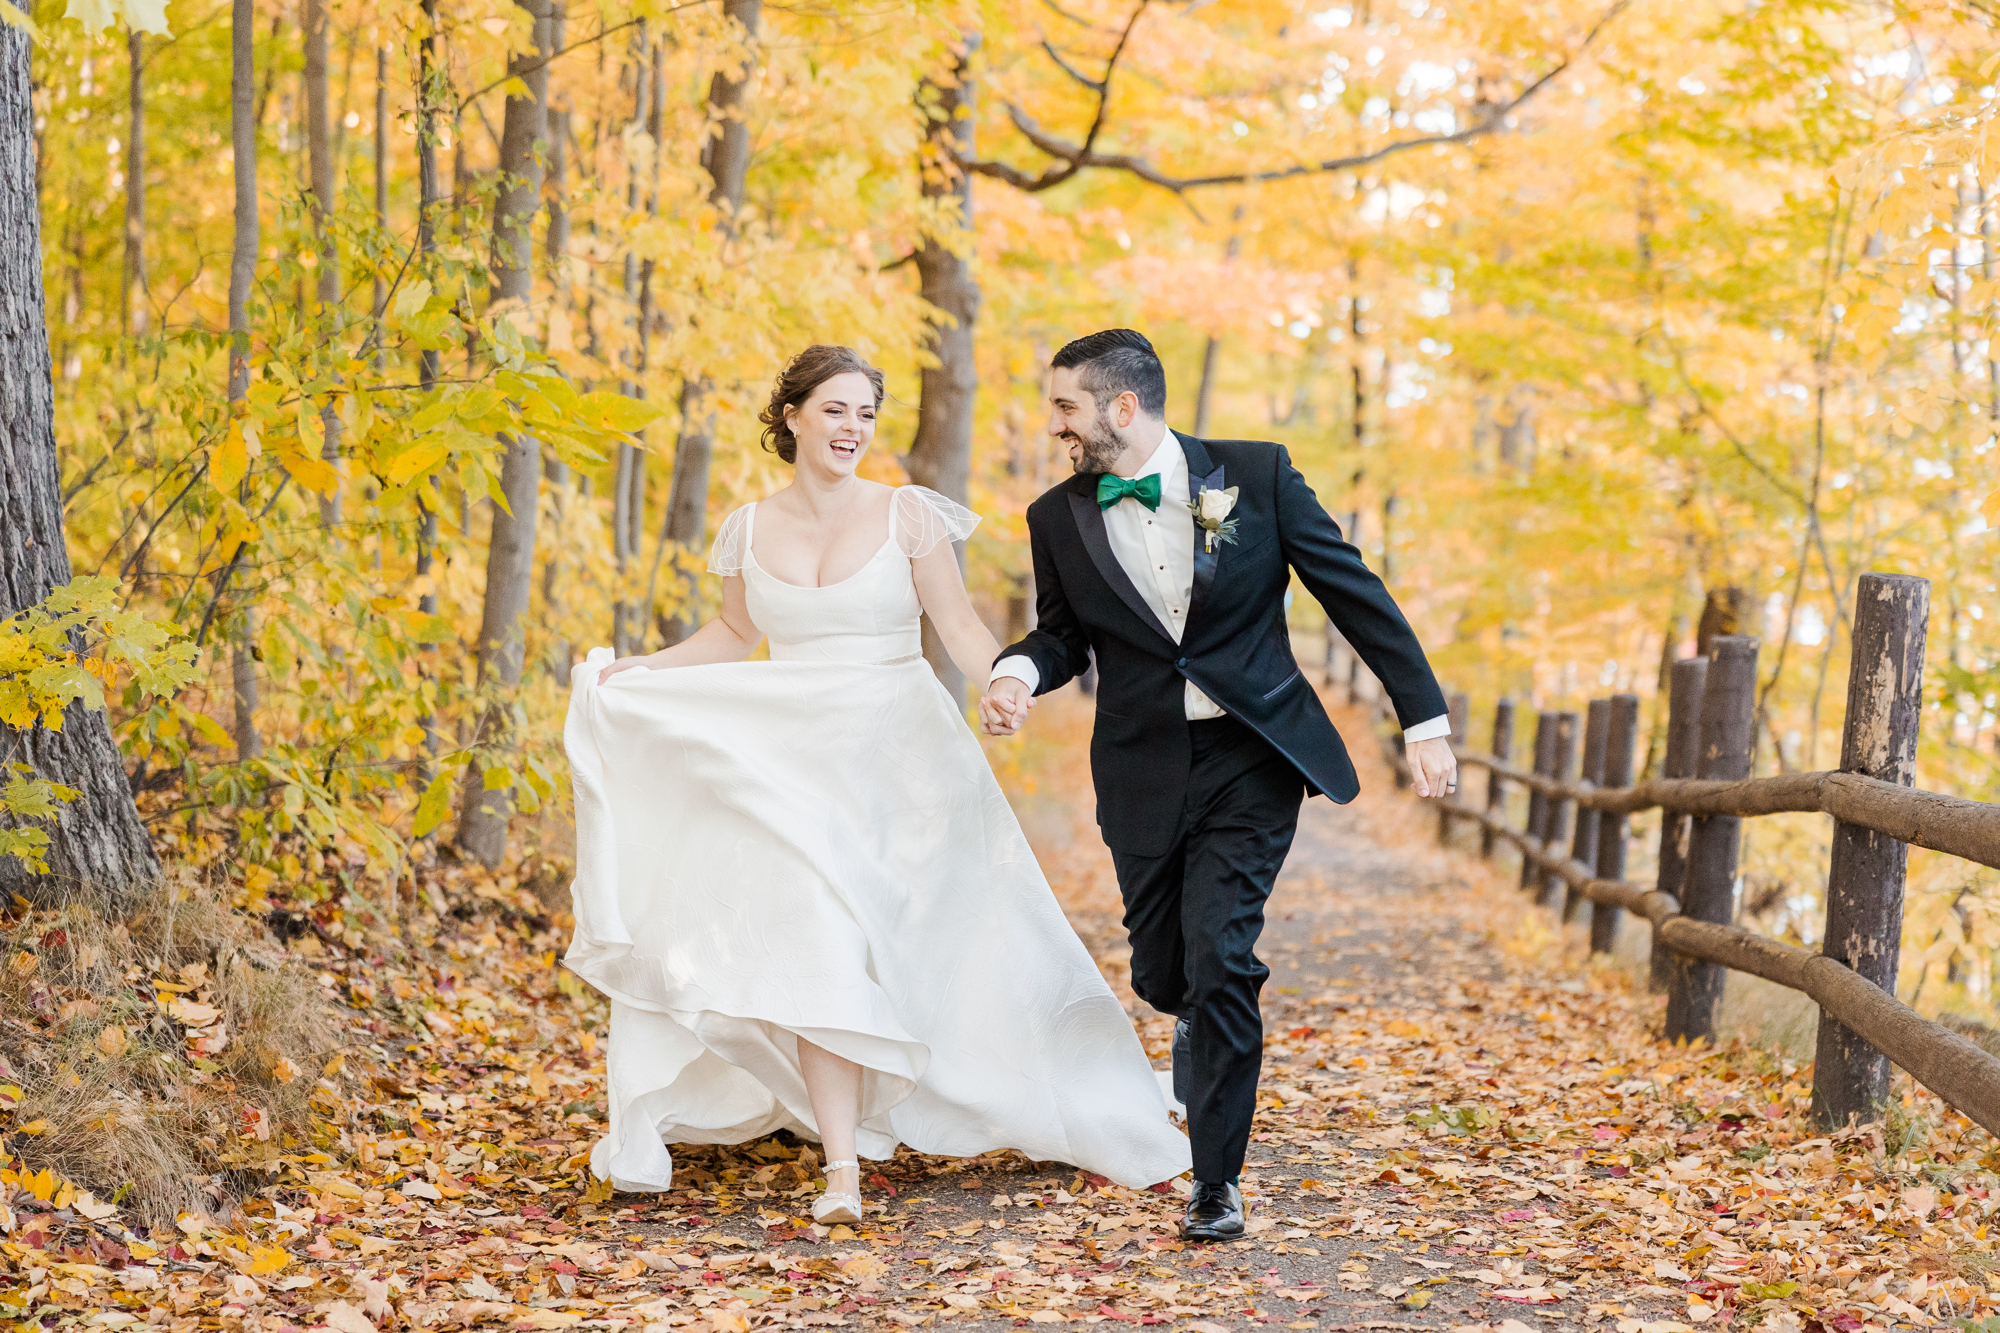 Personal Gate House Wedding in Fall